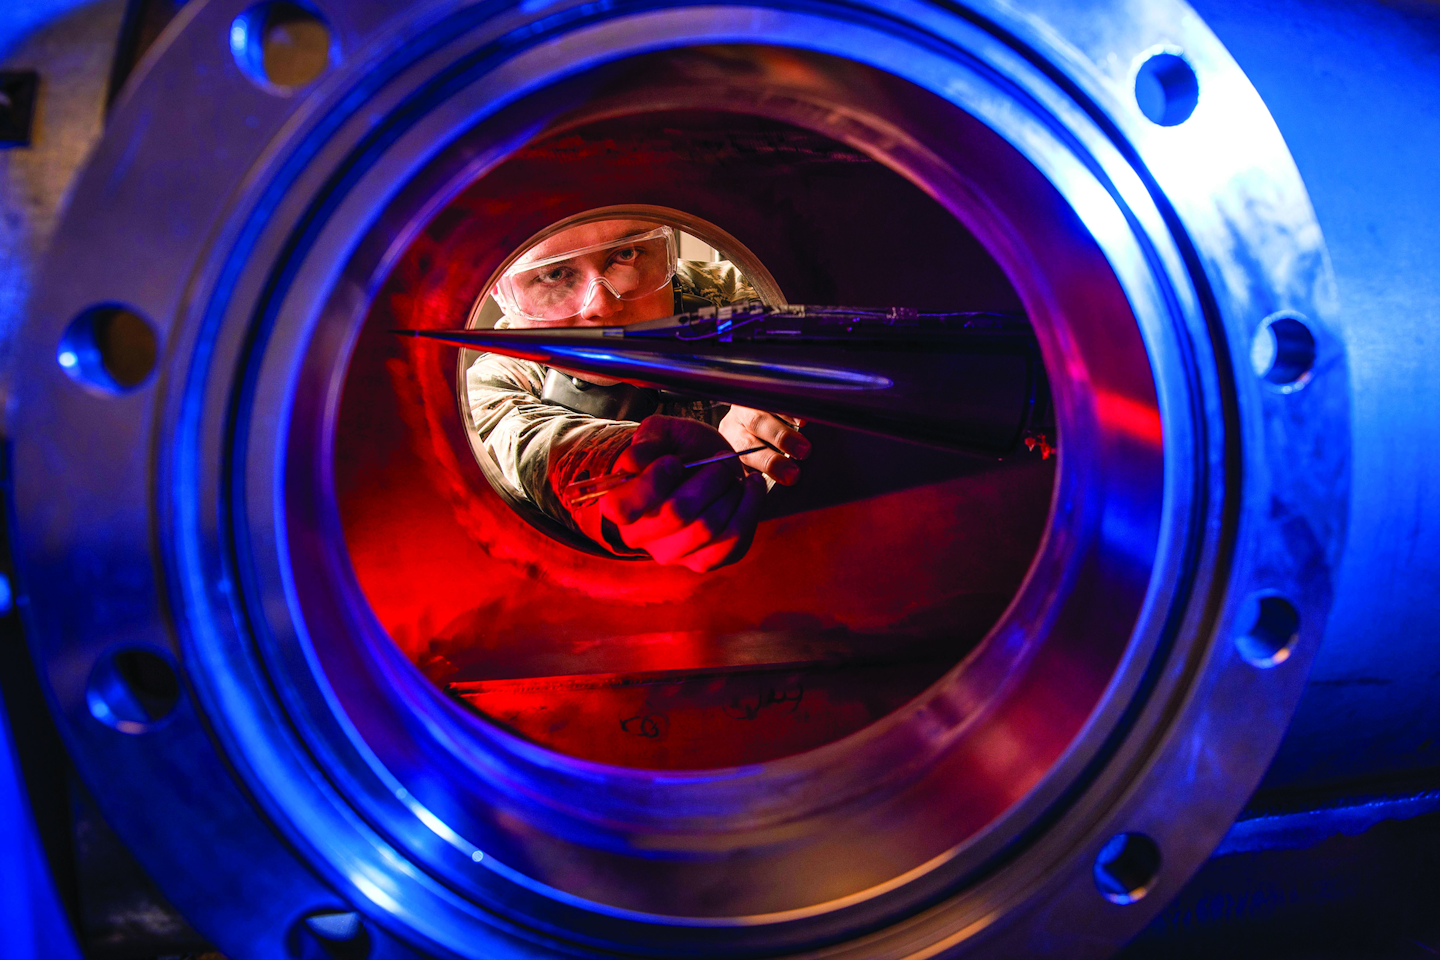 An Air Force Cadet uses a Ludwieg tube, a type of wind tunnel, to measure the pressures, temperatures, and flow fields of basic geometric and hypersonic research vehicles.